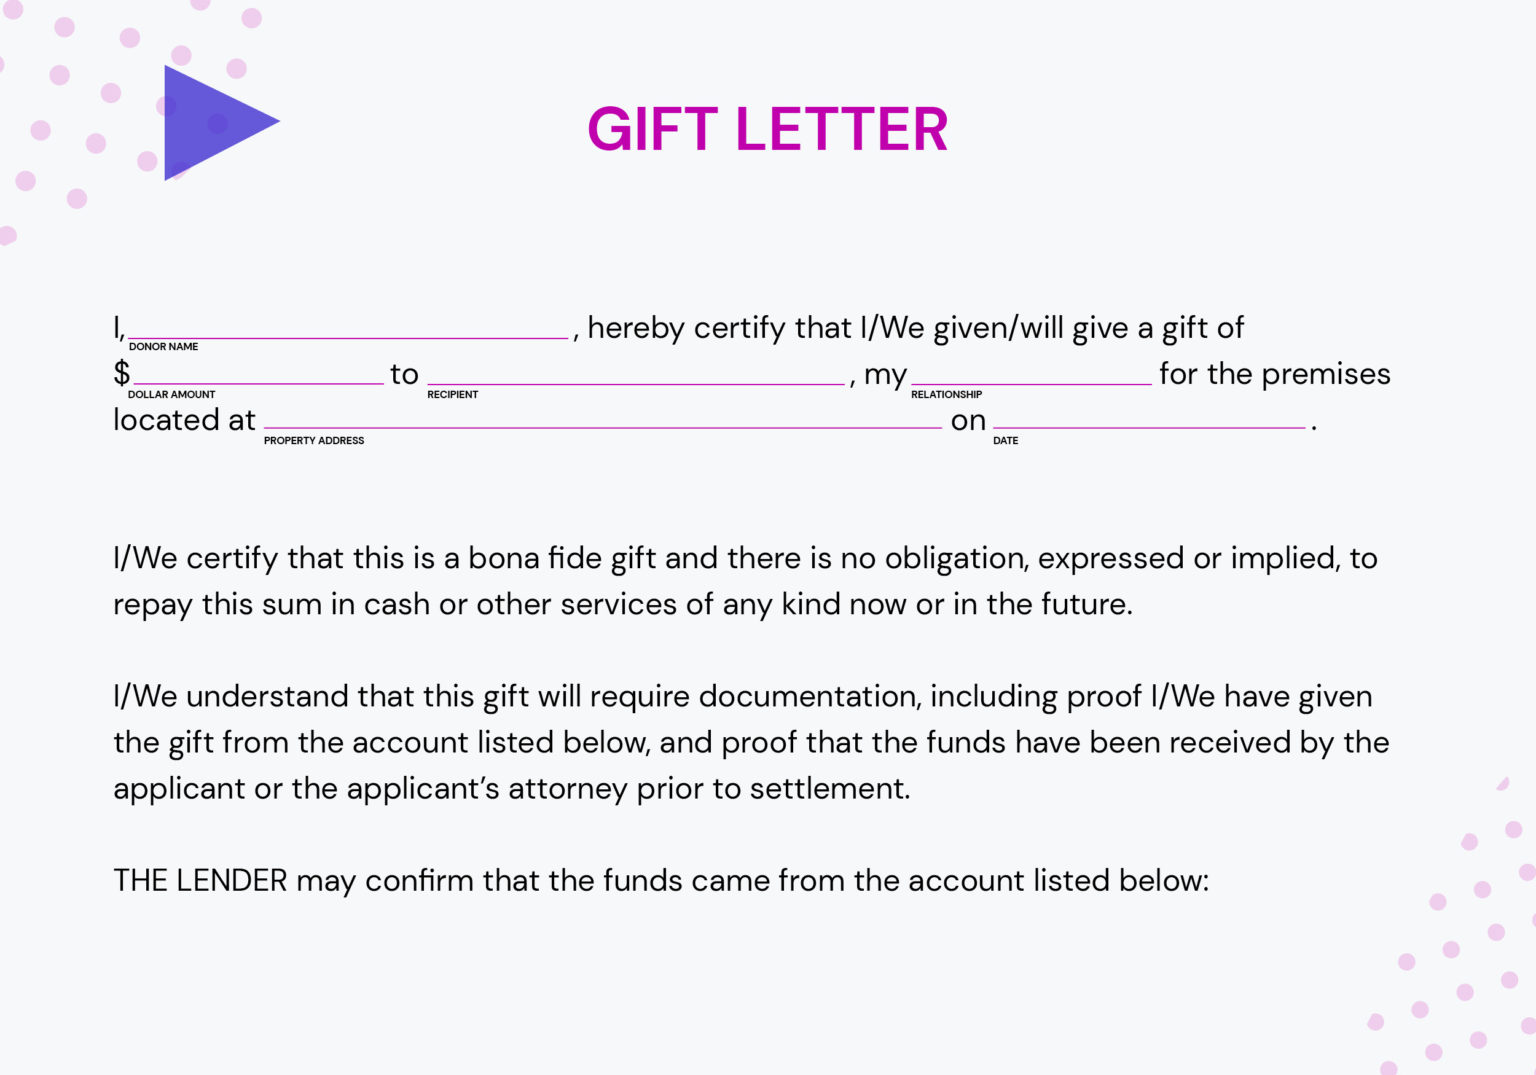 how-to-use-a-gift-letter-for-mortgage-financing-guardhill-financial